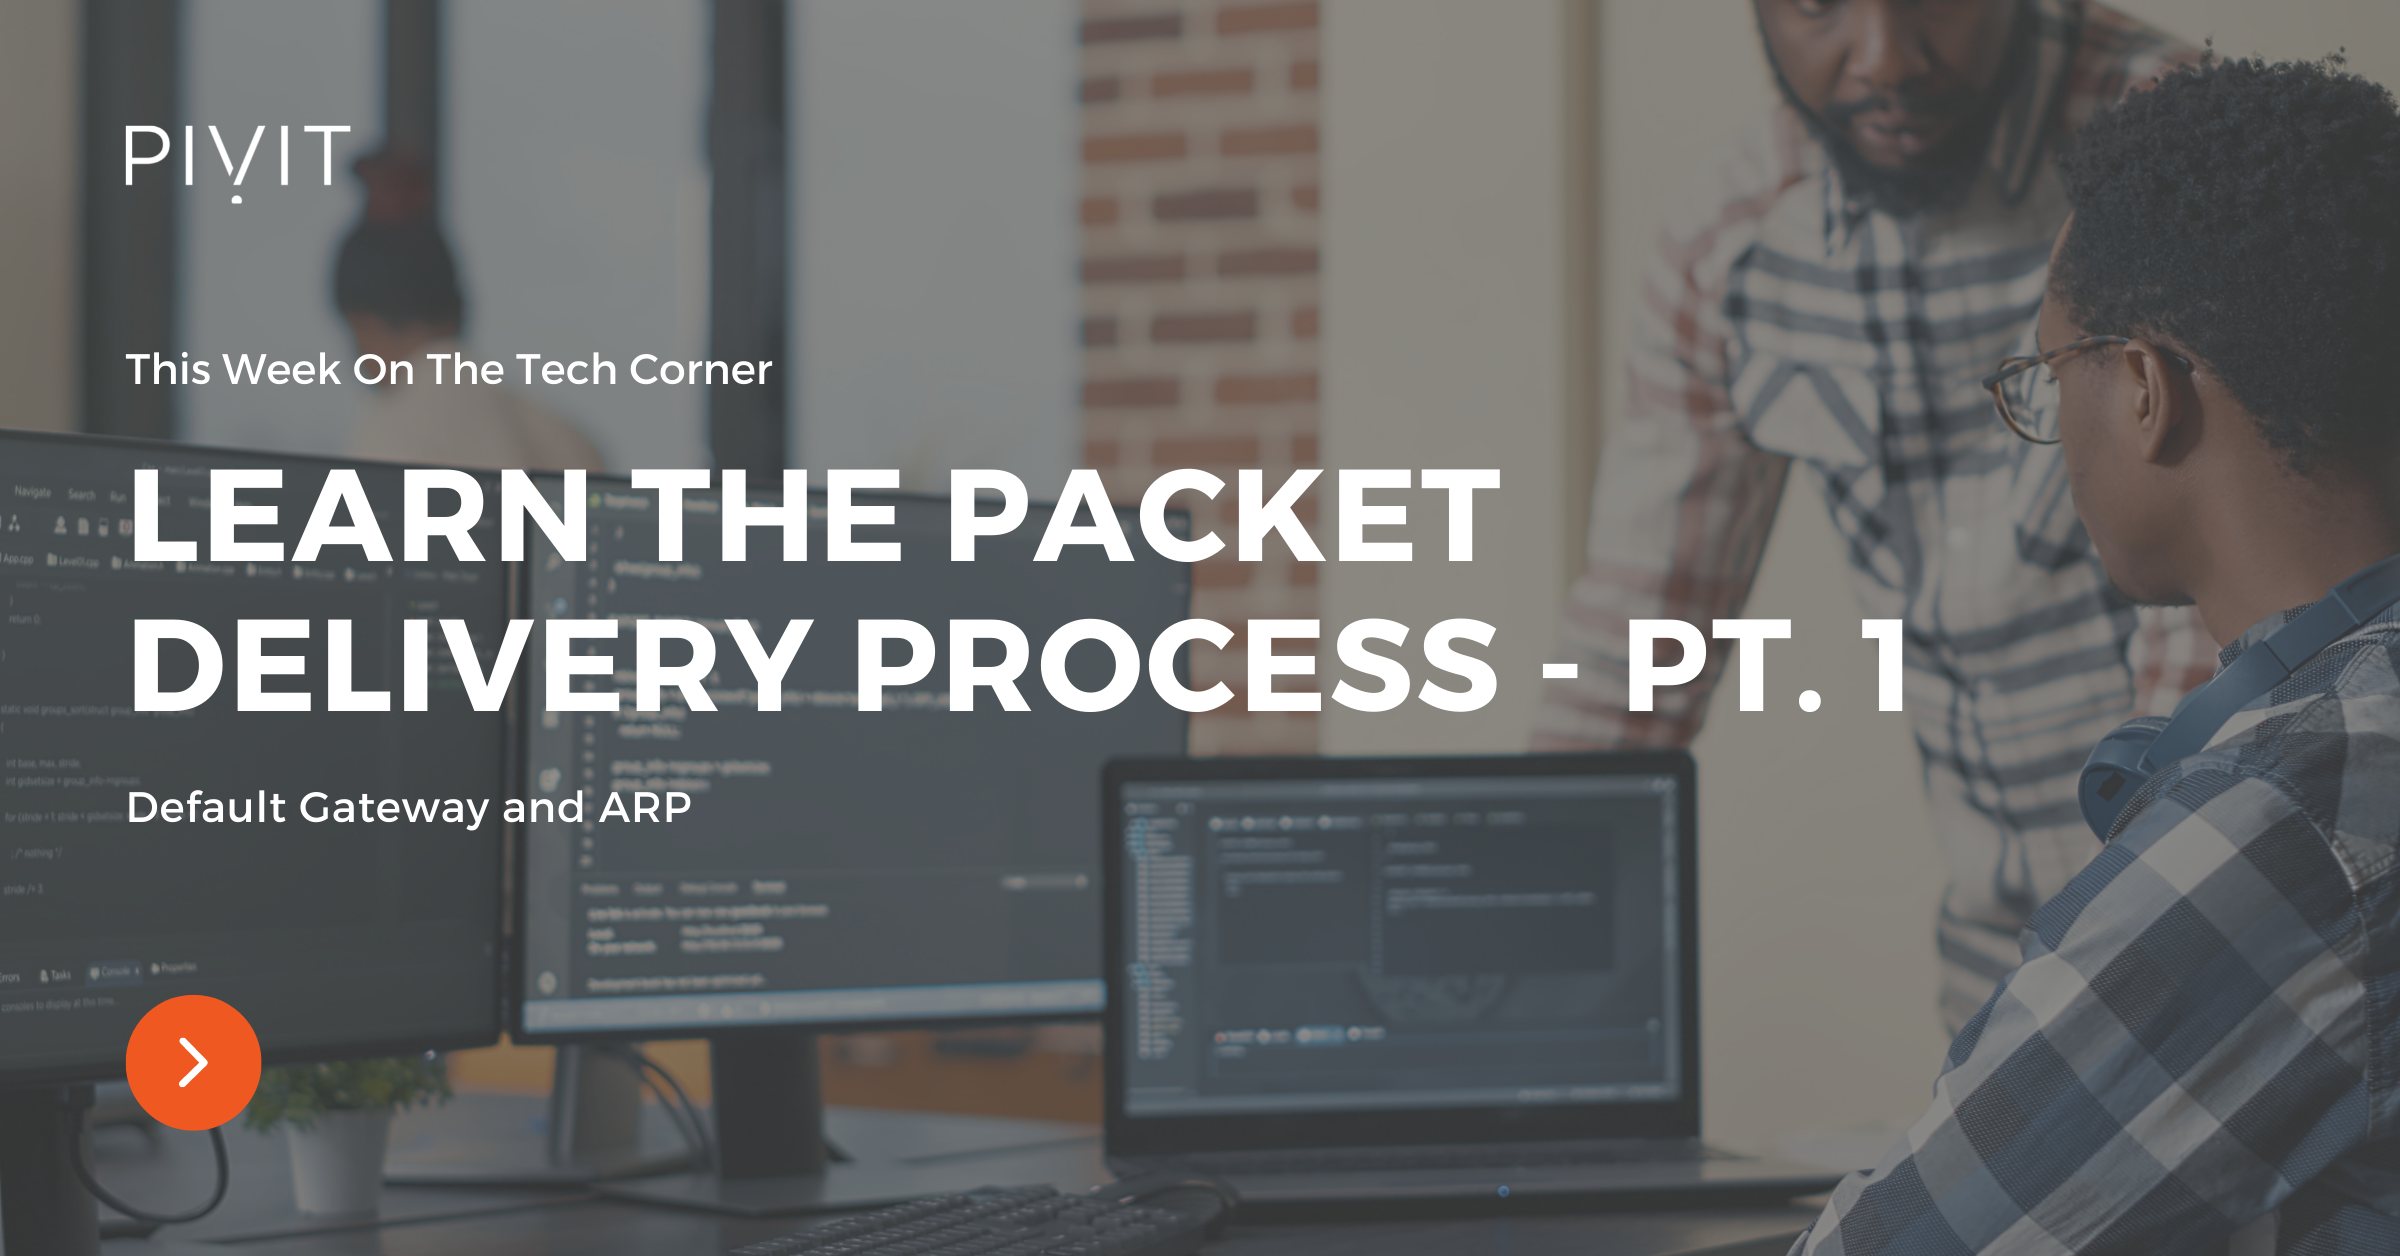 Learn the Packet Delivery Process (Default Gateway and ARP) - Pt. 1